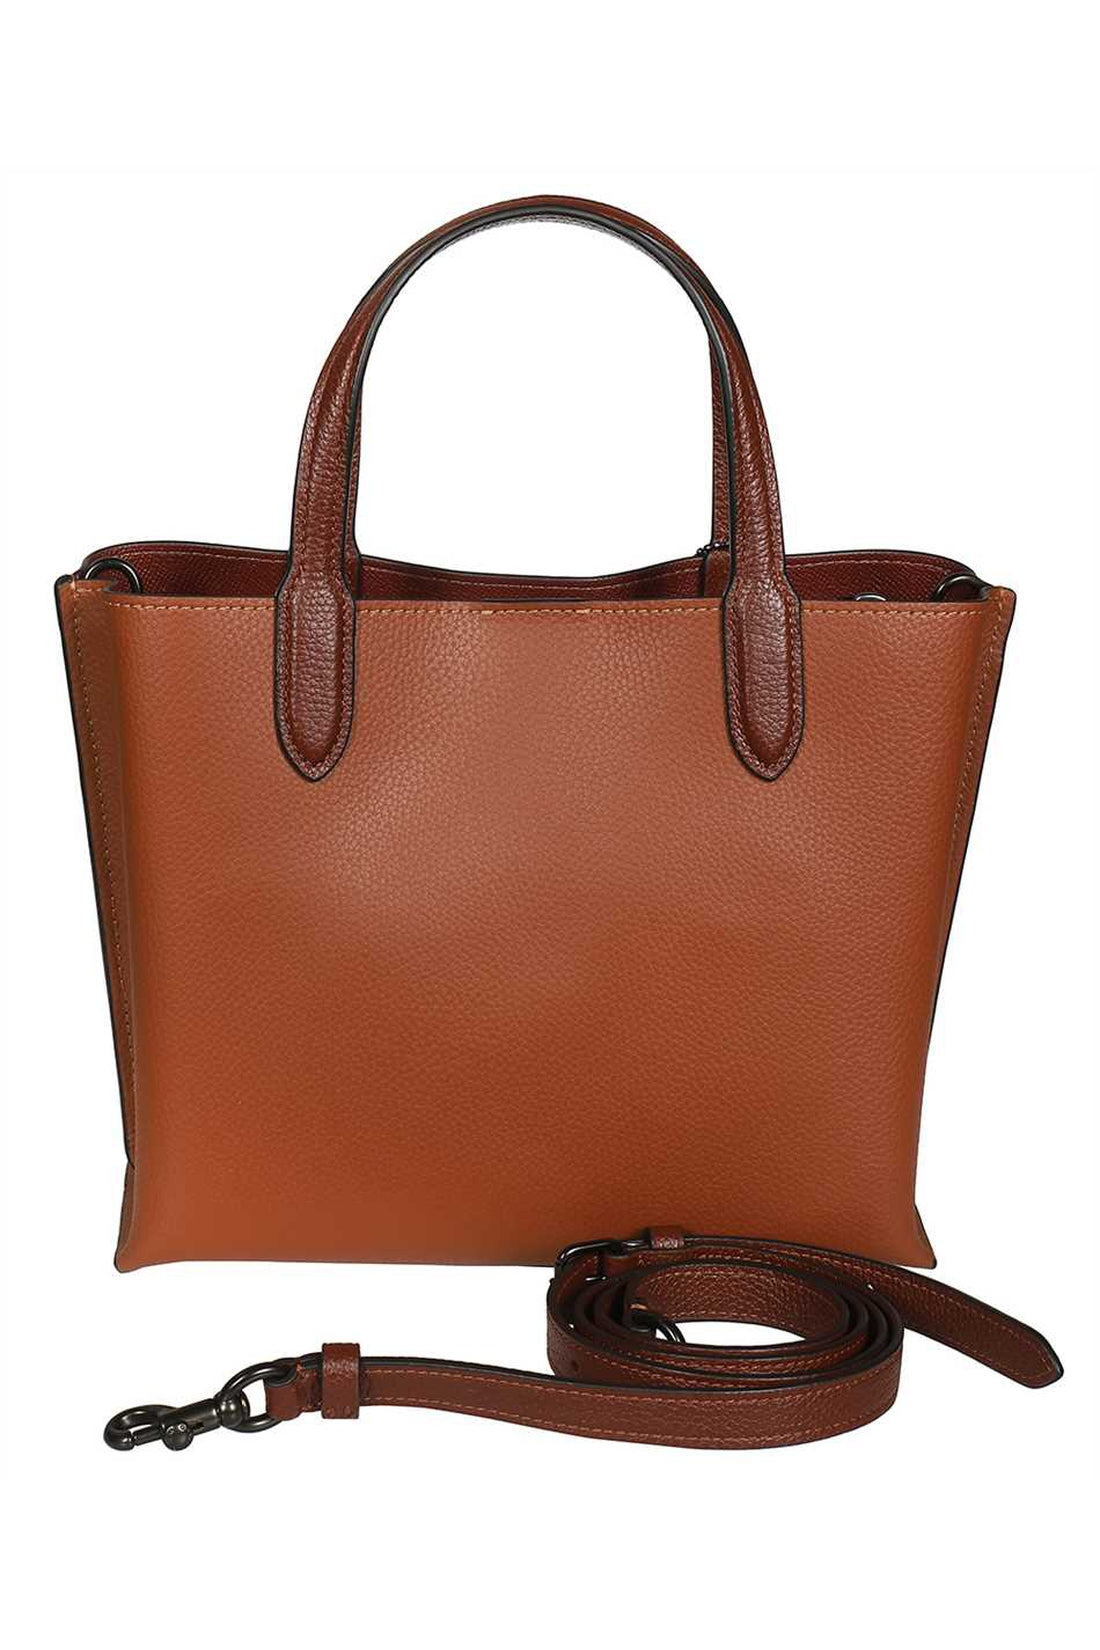 Coach-OUTLET-SALE-Willow leather tote-ARCHIVIST